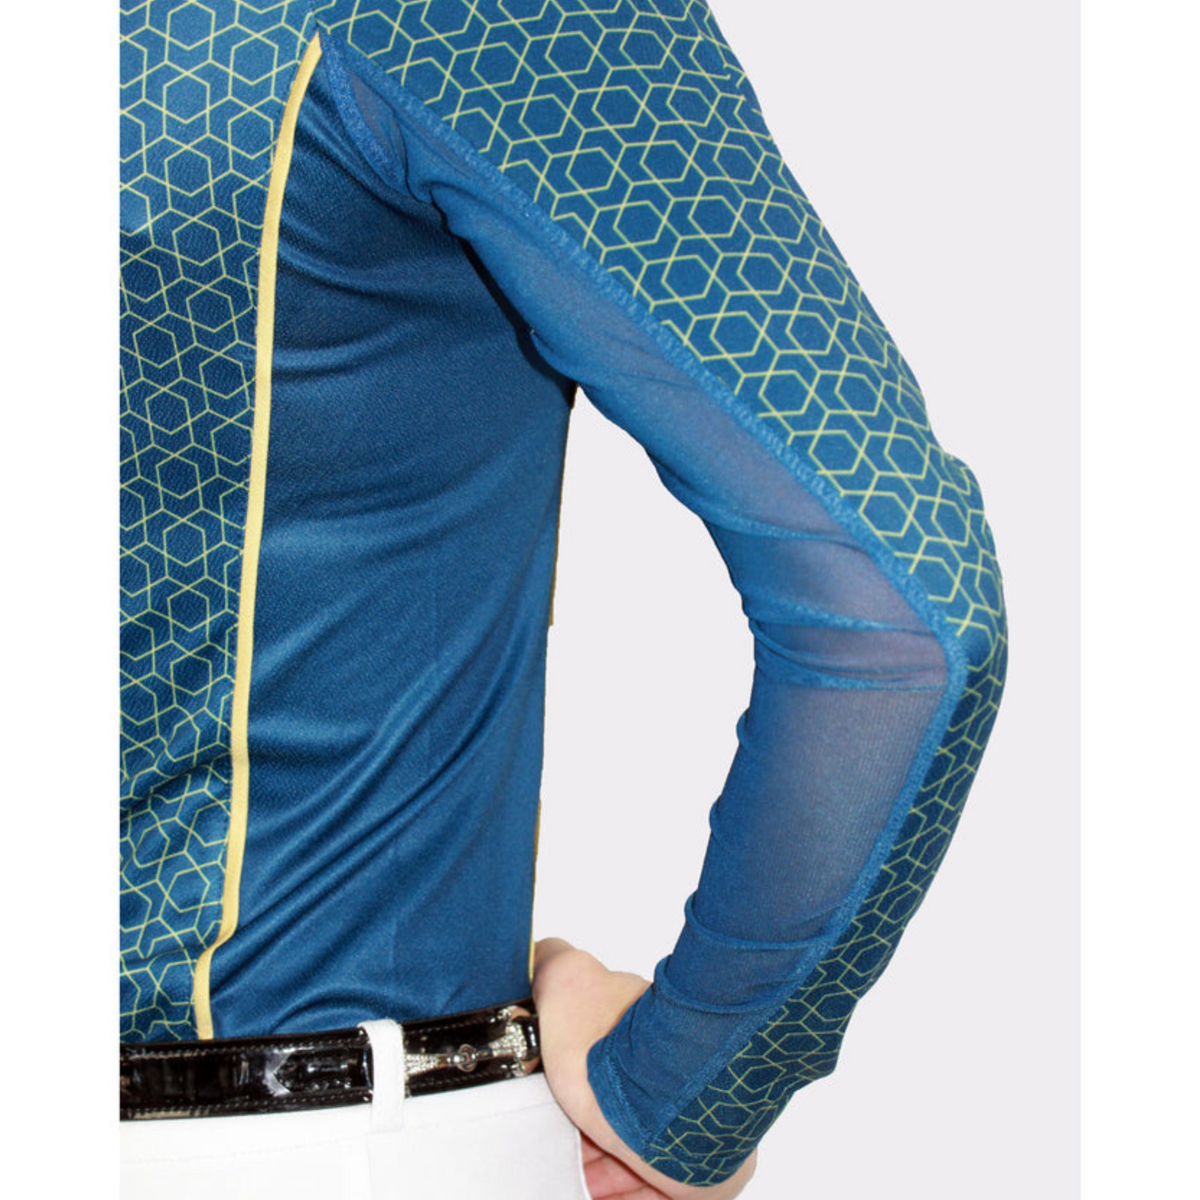 Blue geometric long sleeve with mesh panelling.